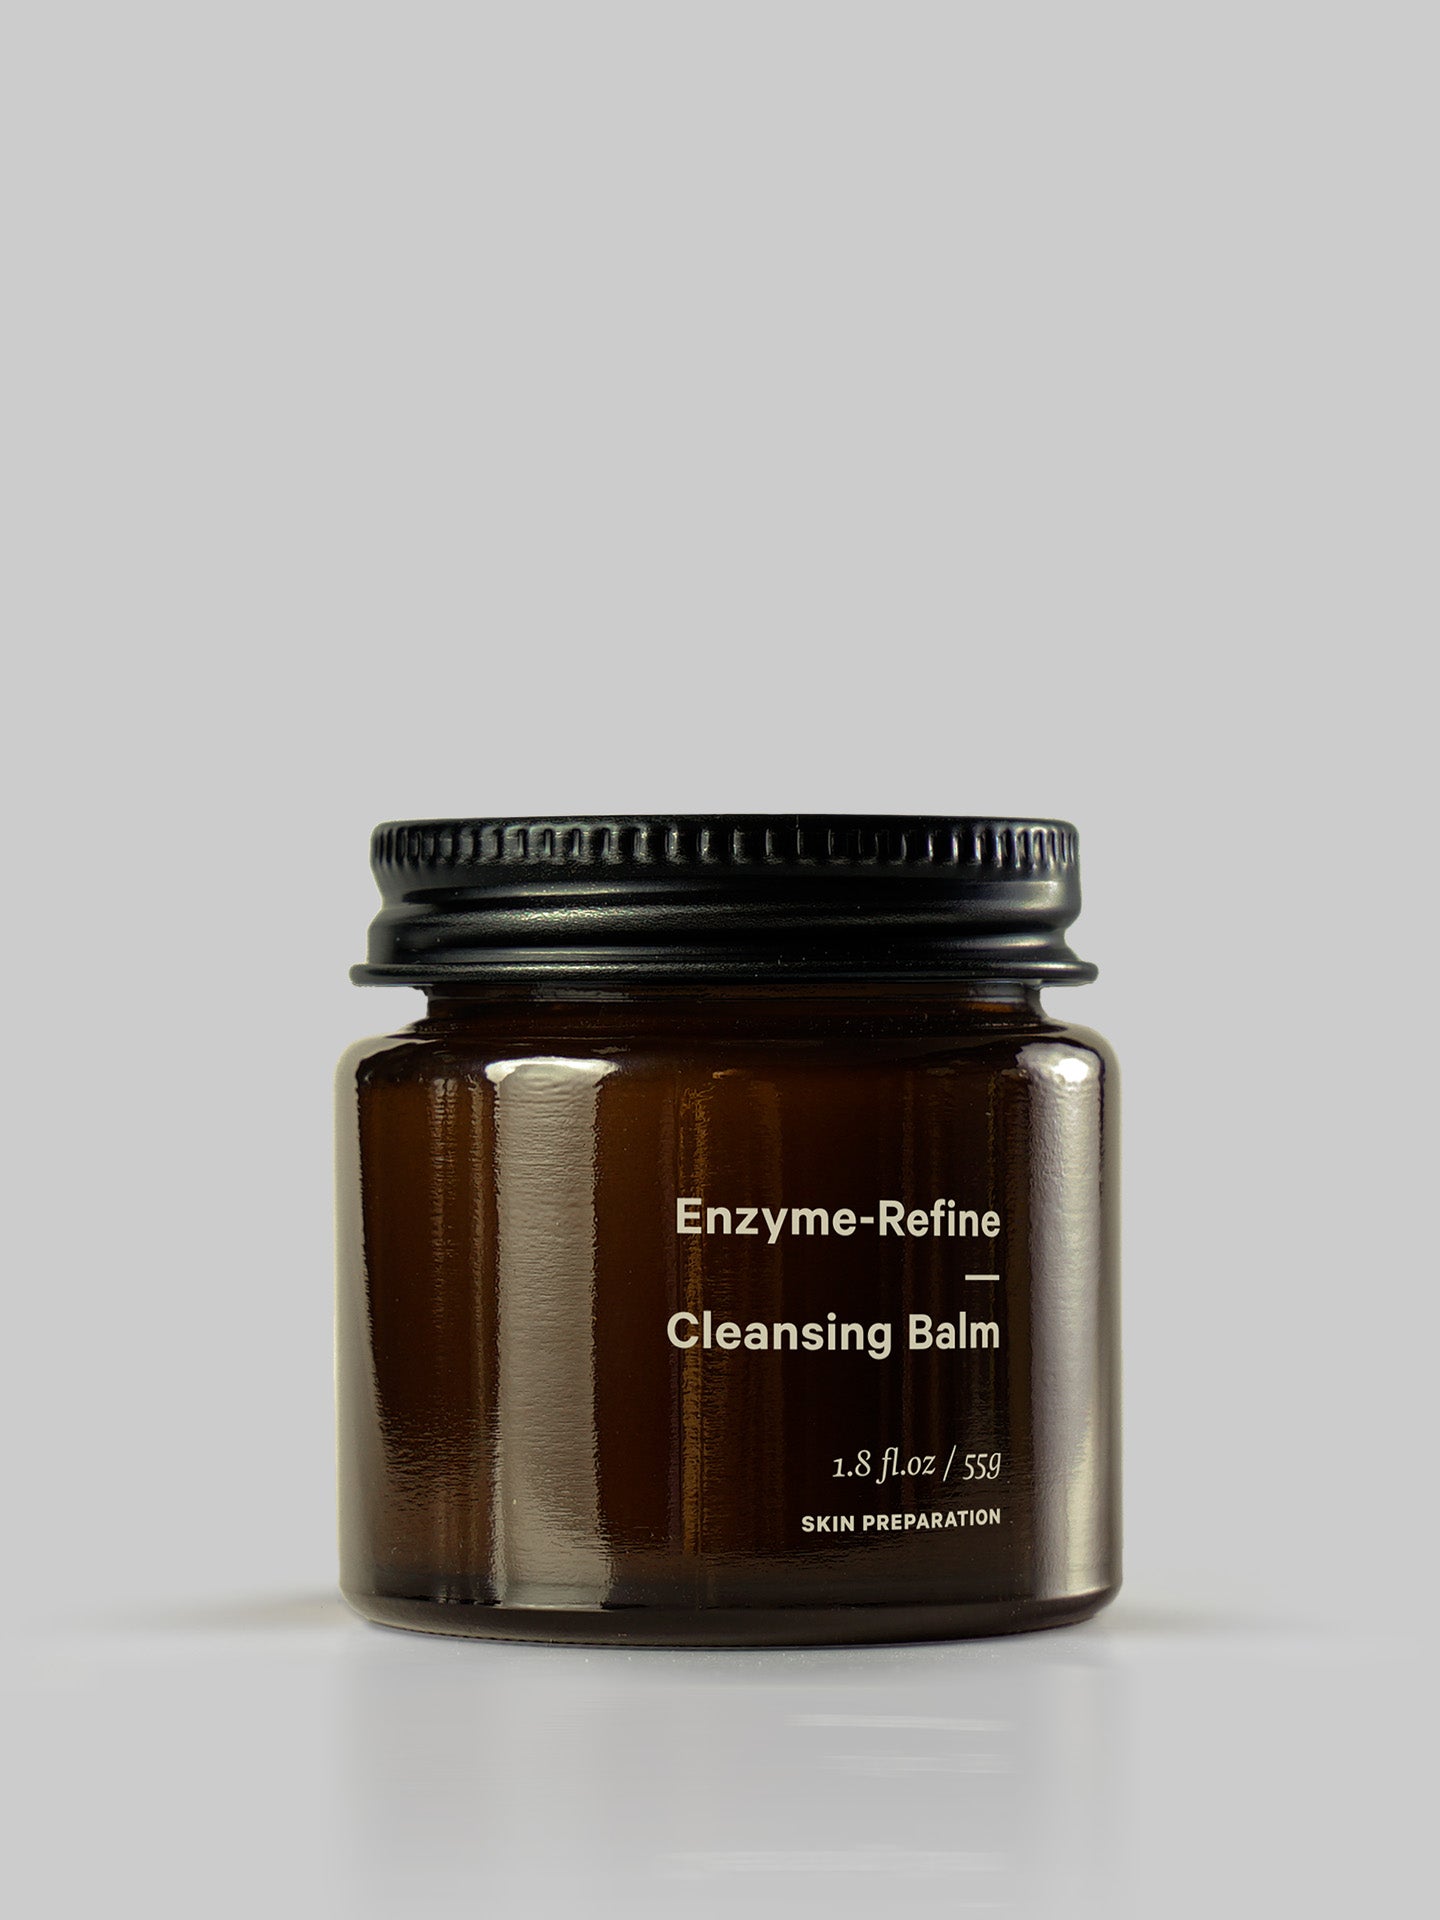 A jar of MARYSE Enzyme-Refine – Cleansing Balm with a label on it.